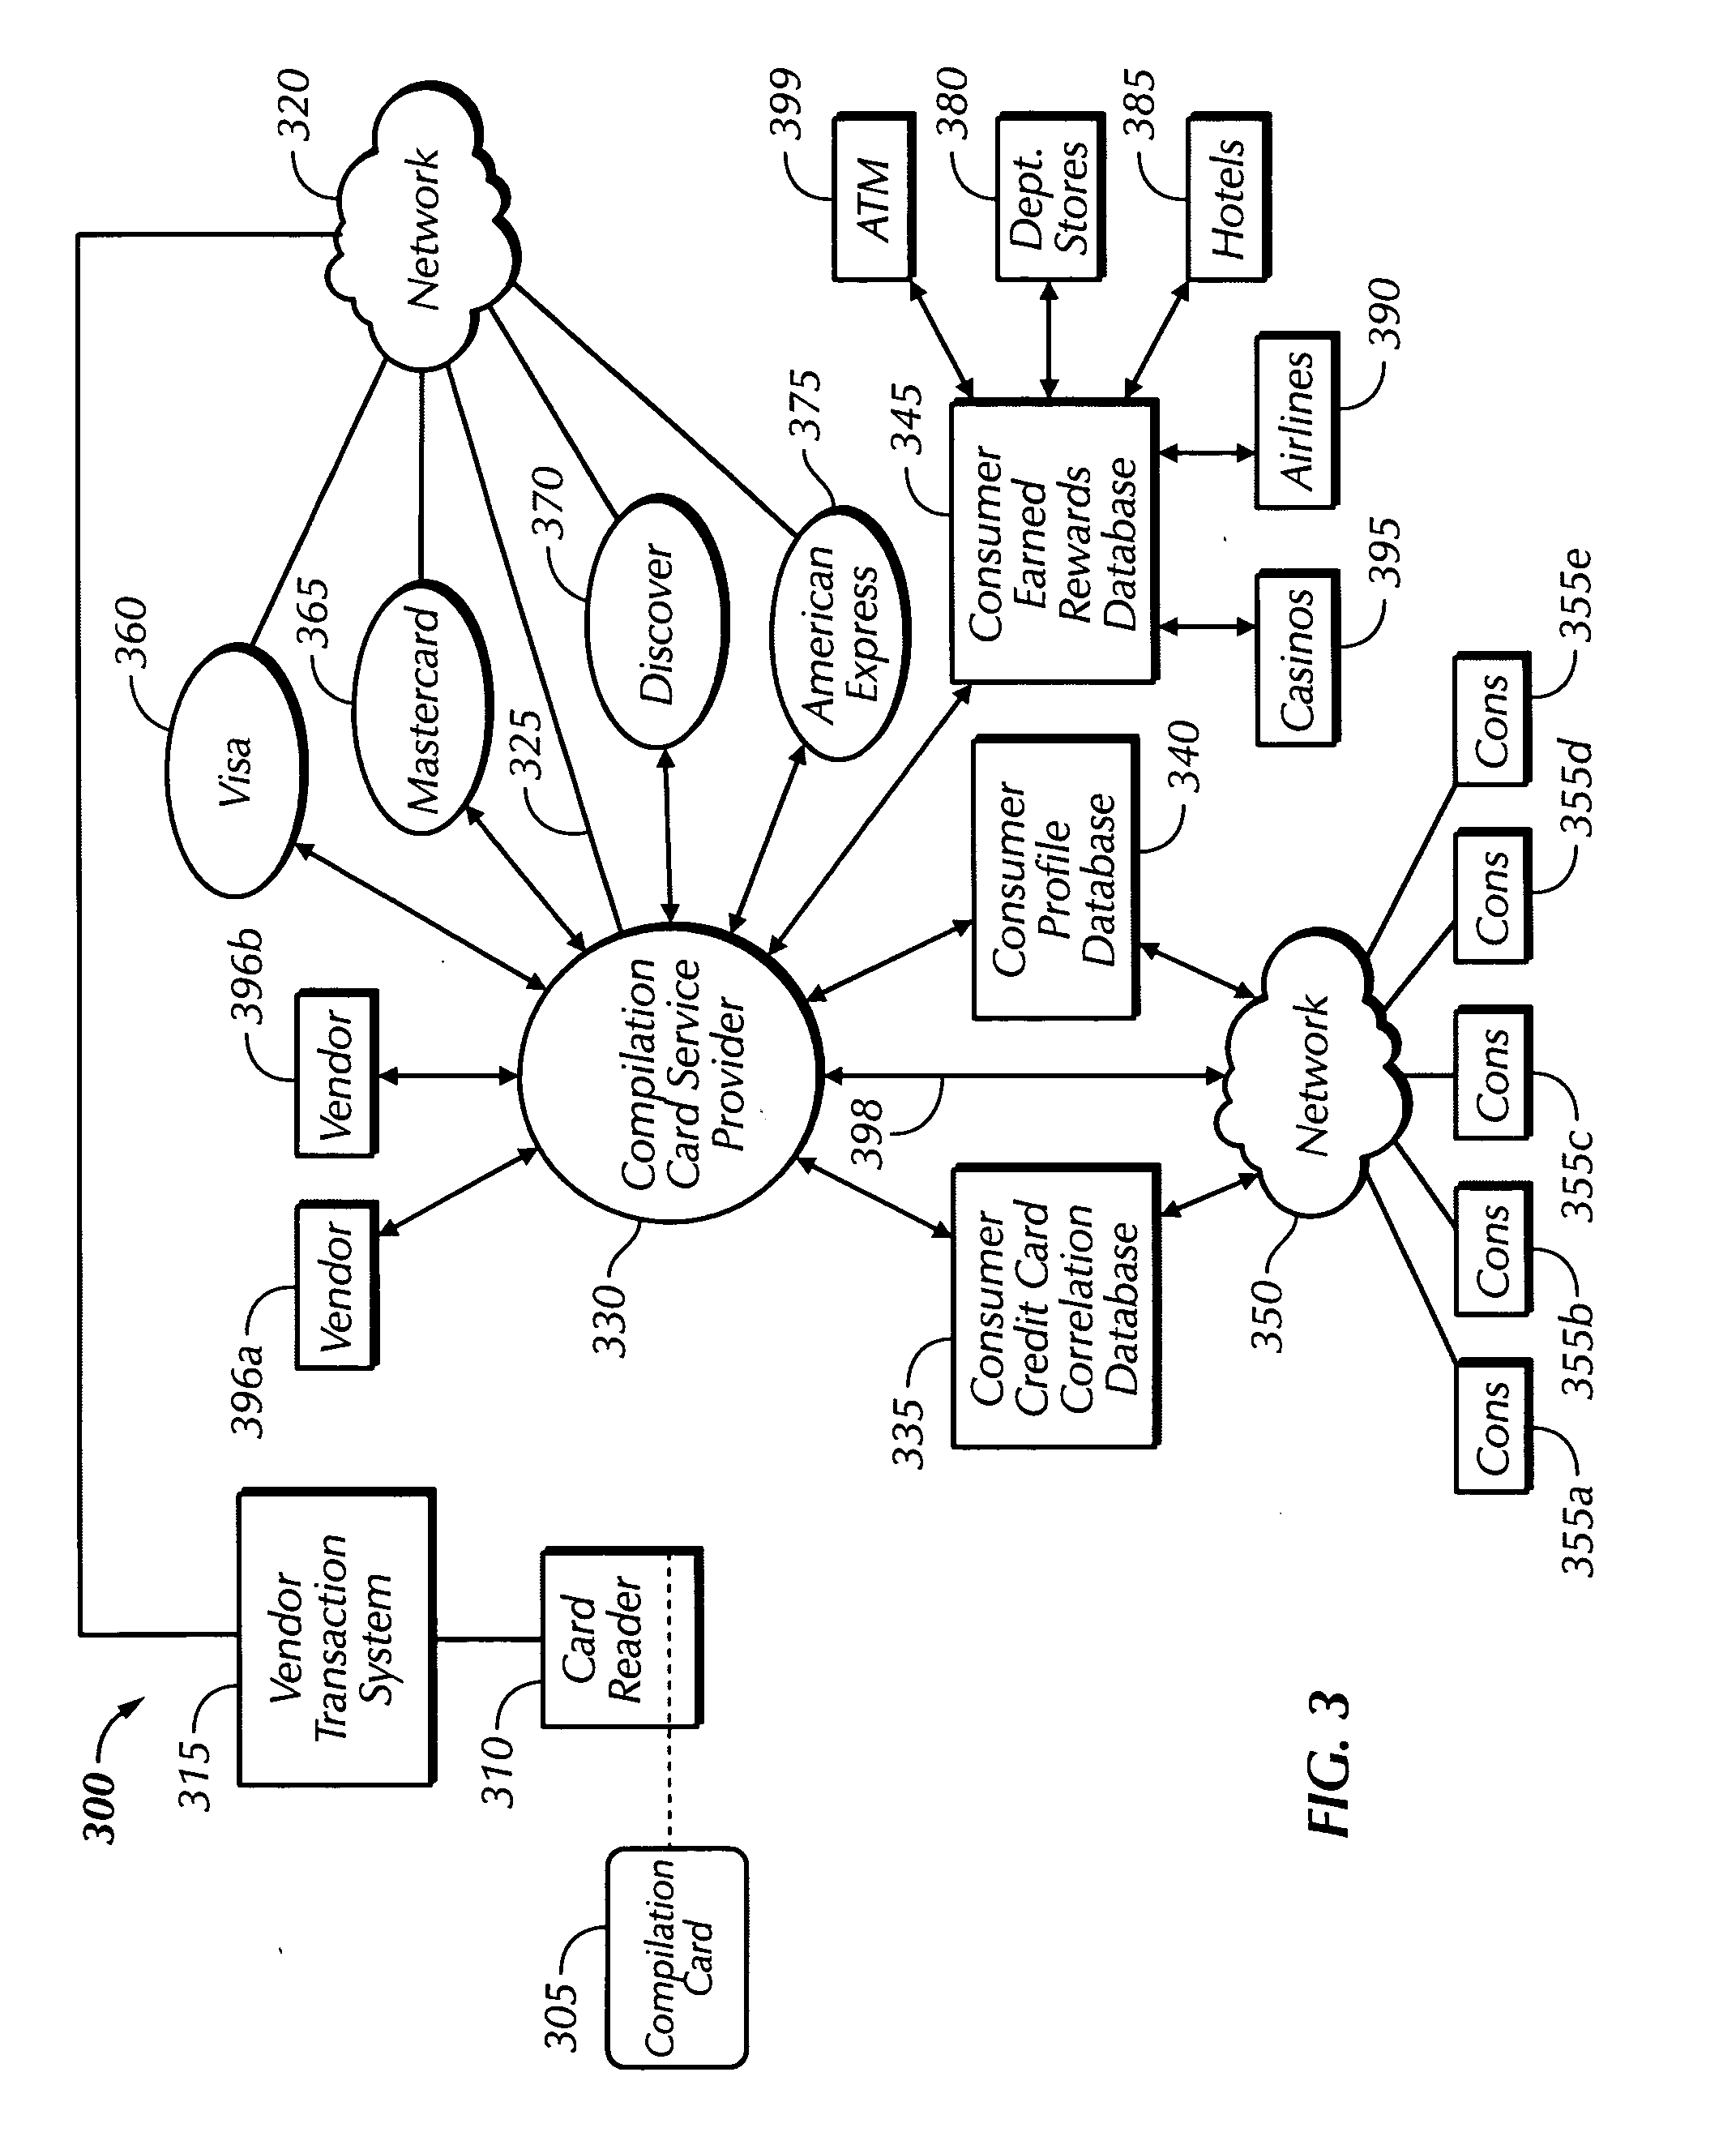 Method and apparatus for monetizing personal consumer profiles by aggregating a plurality of consumer credit card accounts into one card